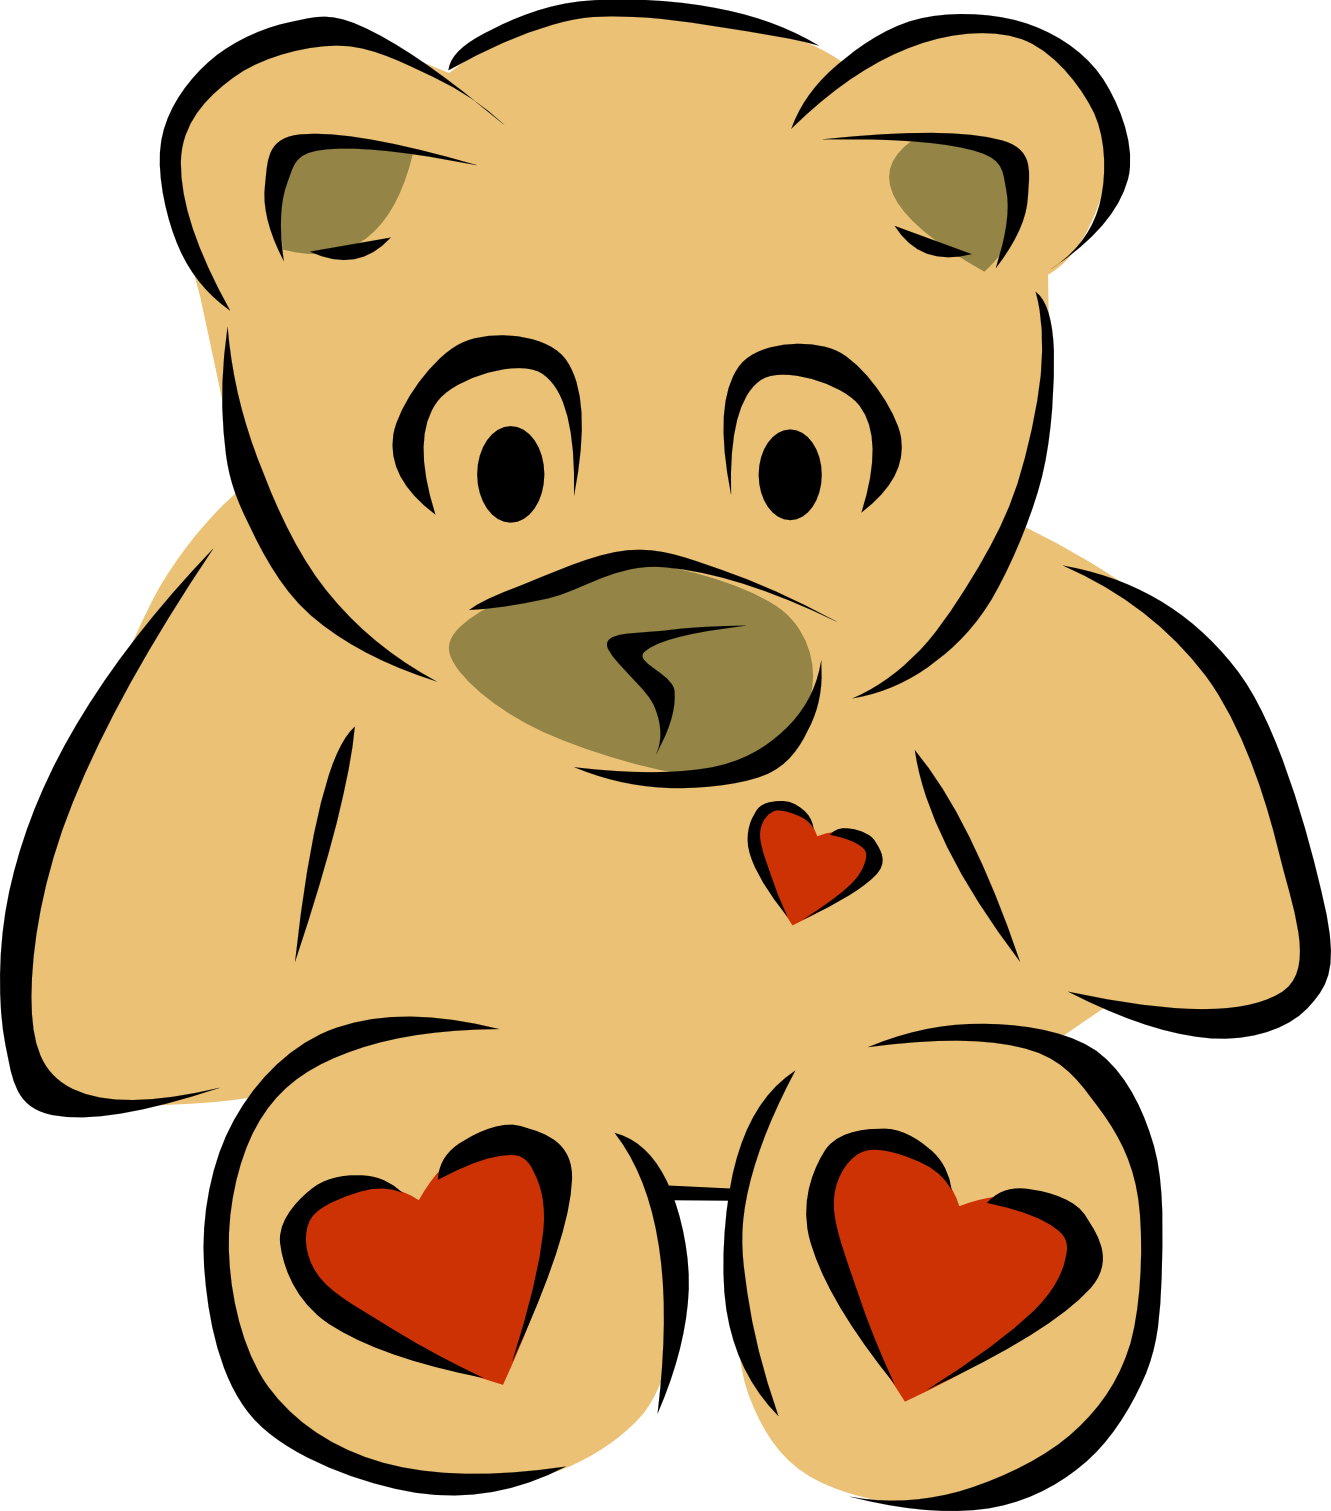 Baby Teddy Bear Clipart | Clipart library - Free Clipart Images